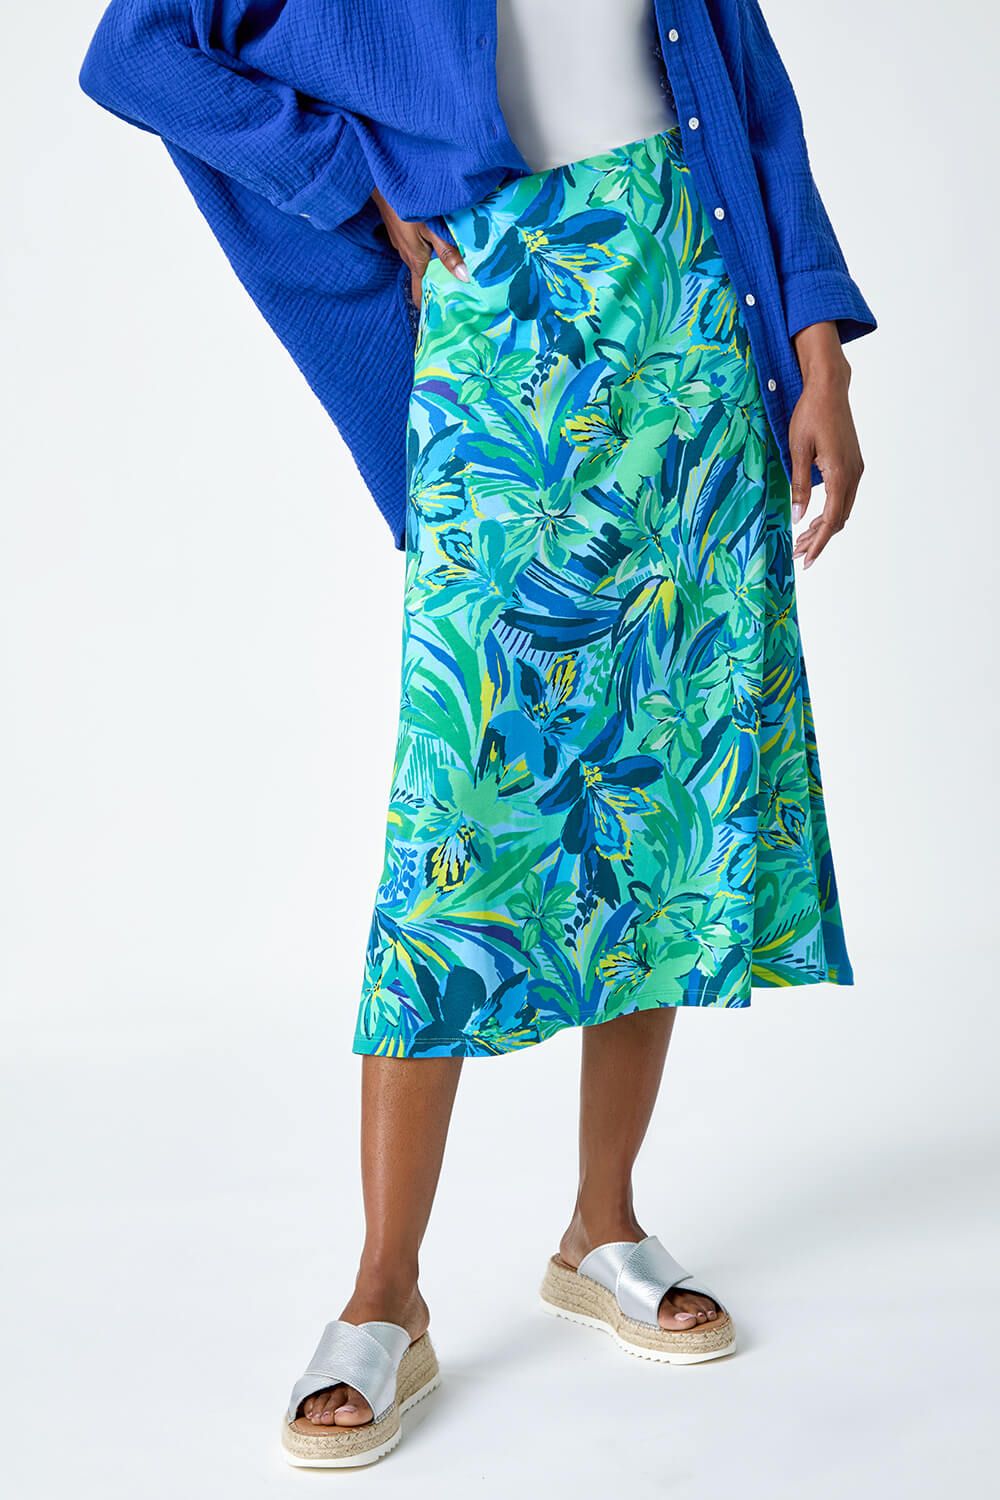 Green Tropical Floral Stretch Panel Skirt, Image 4 of 5